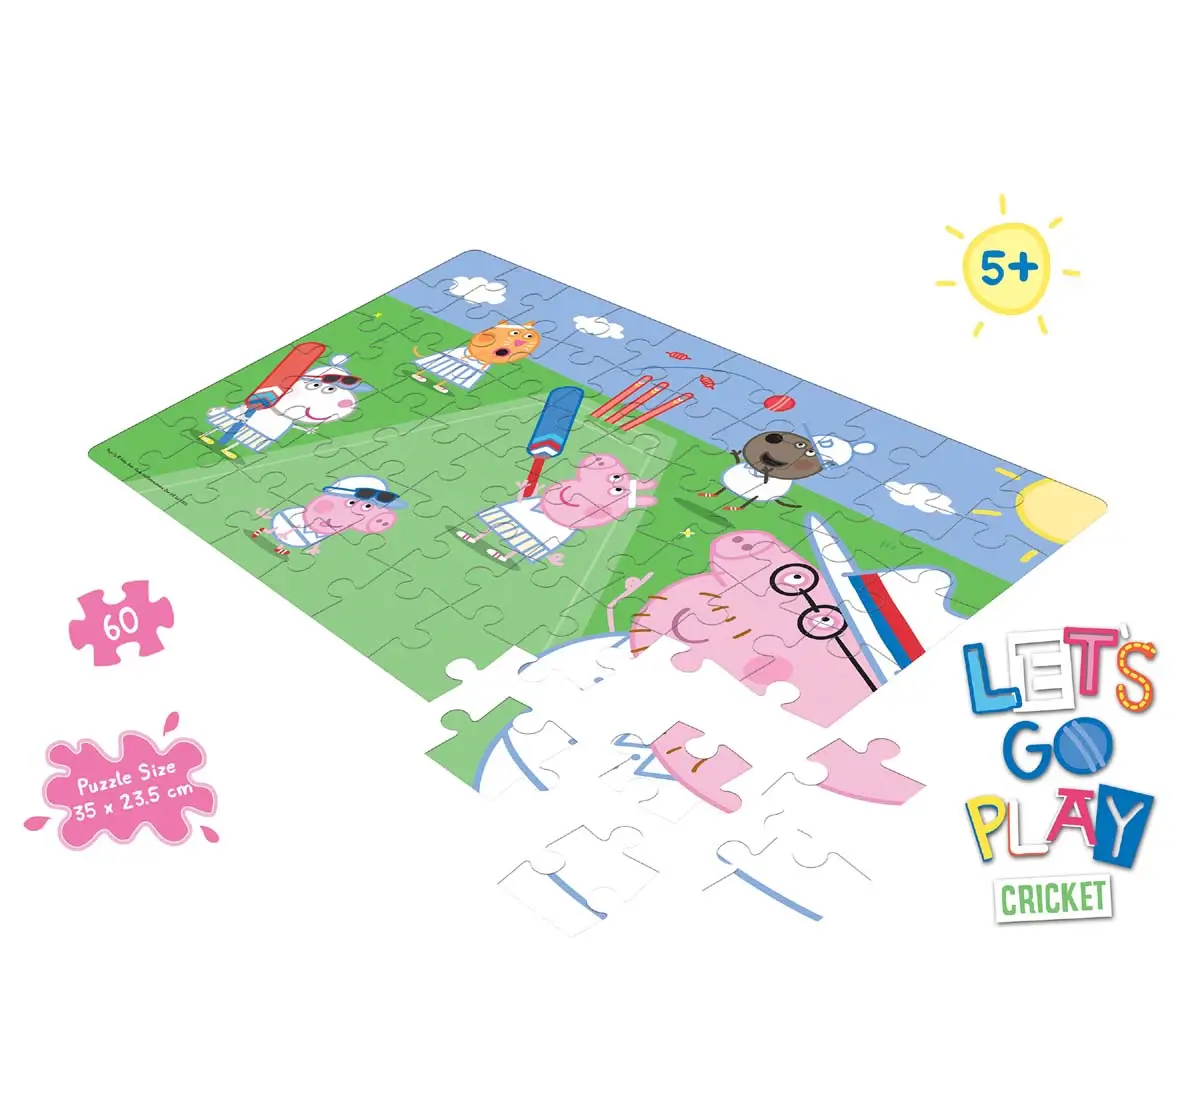 Frank Peppa Pig Play Cricket Puzzles for Kids Age 5Y+